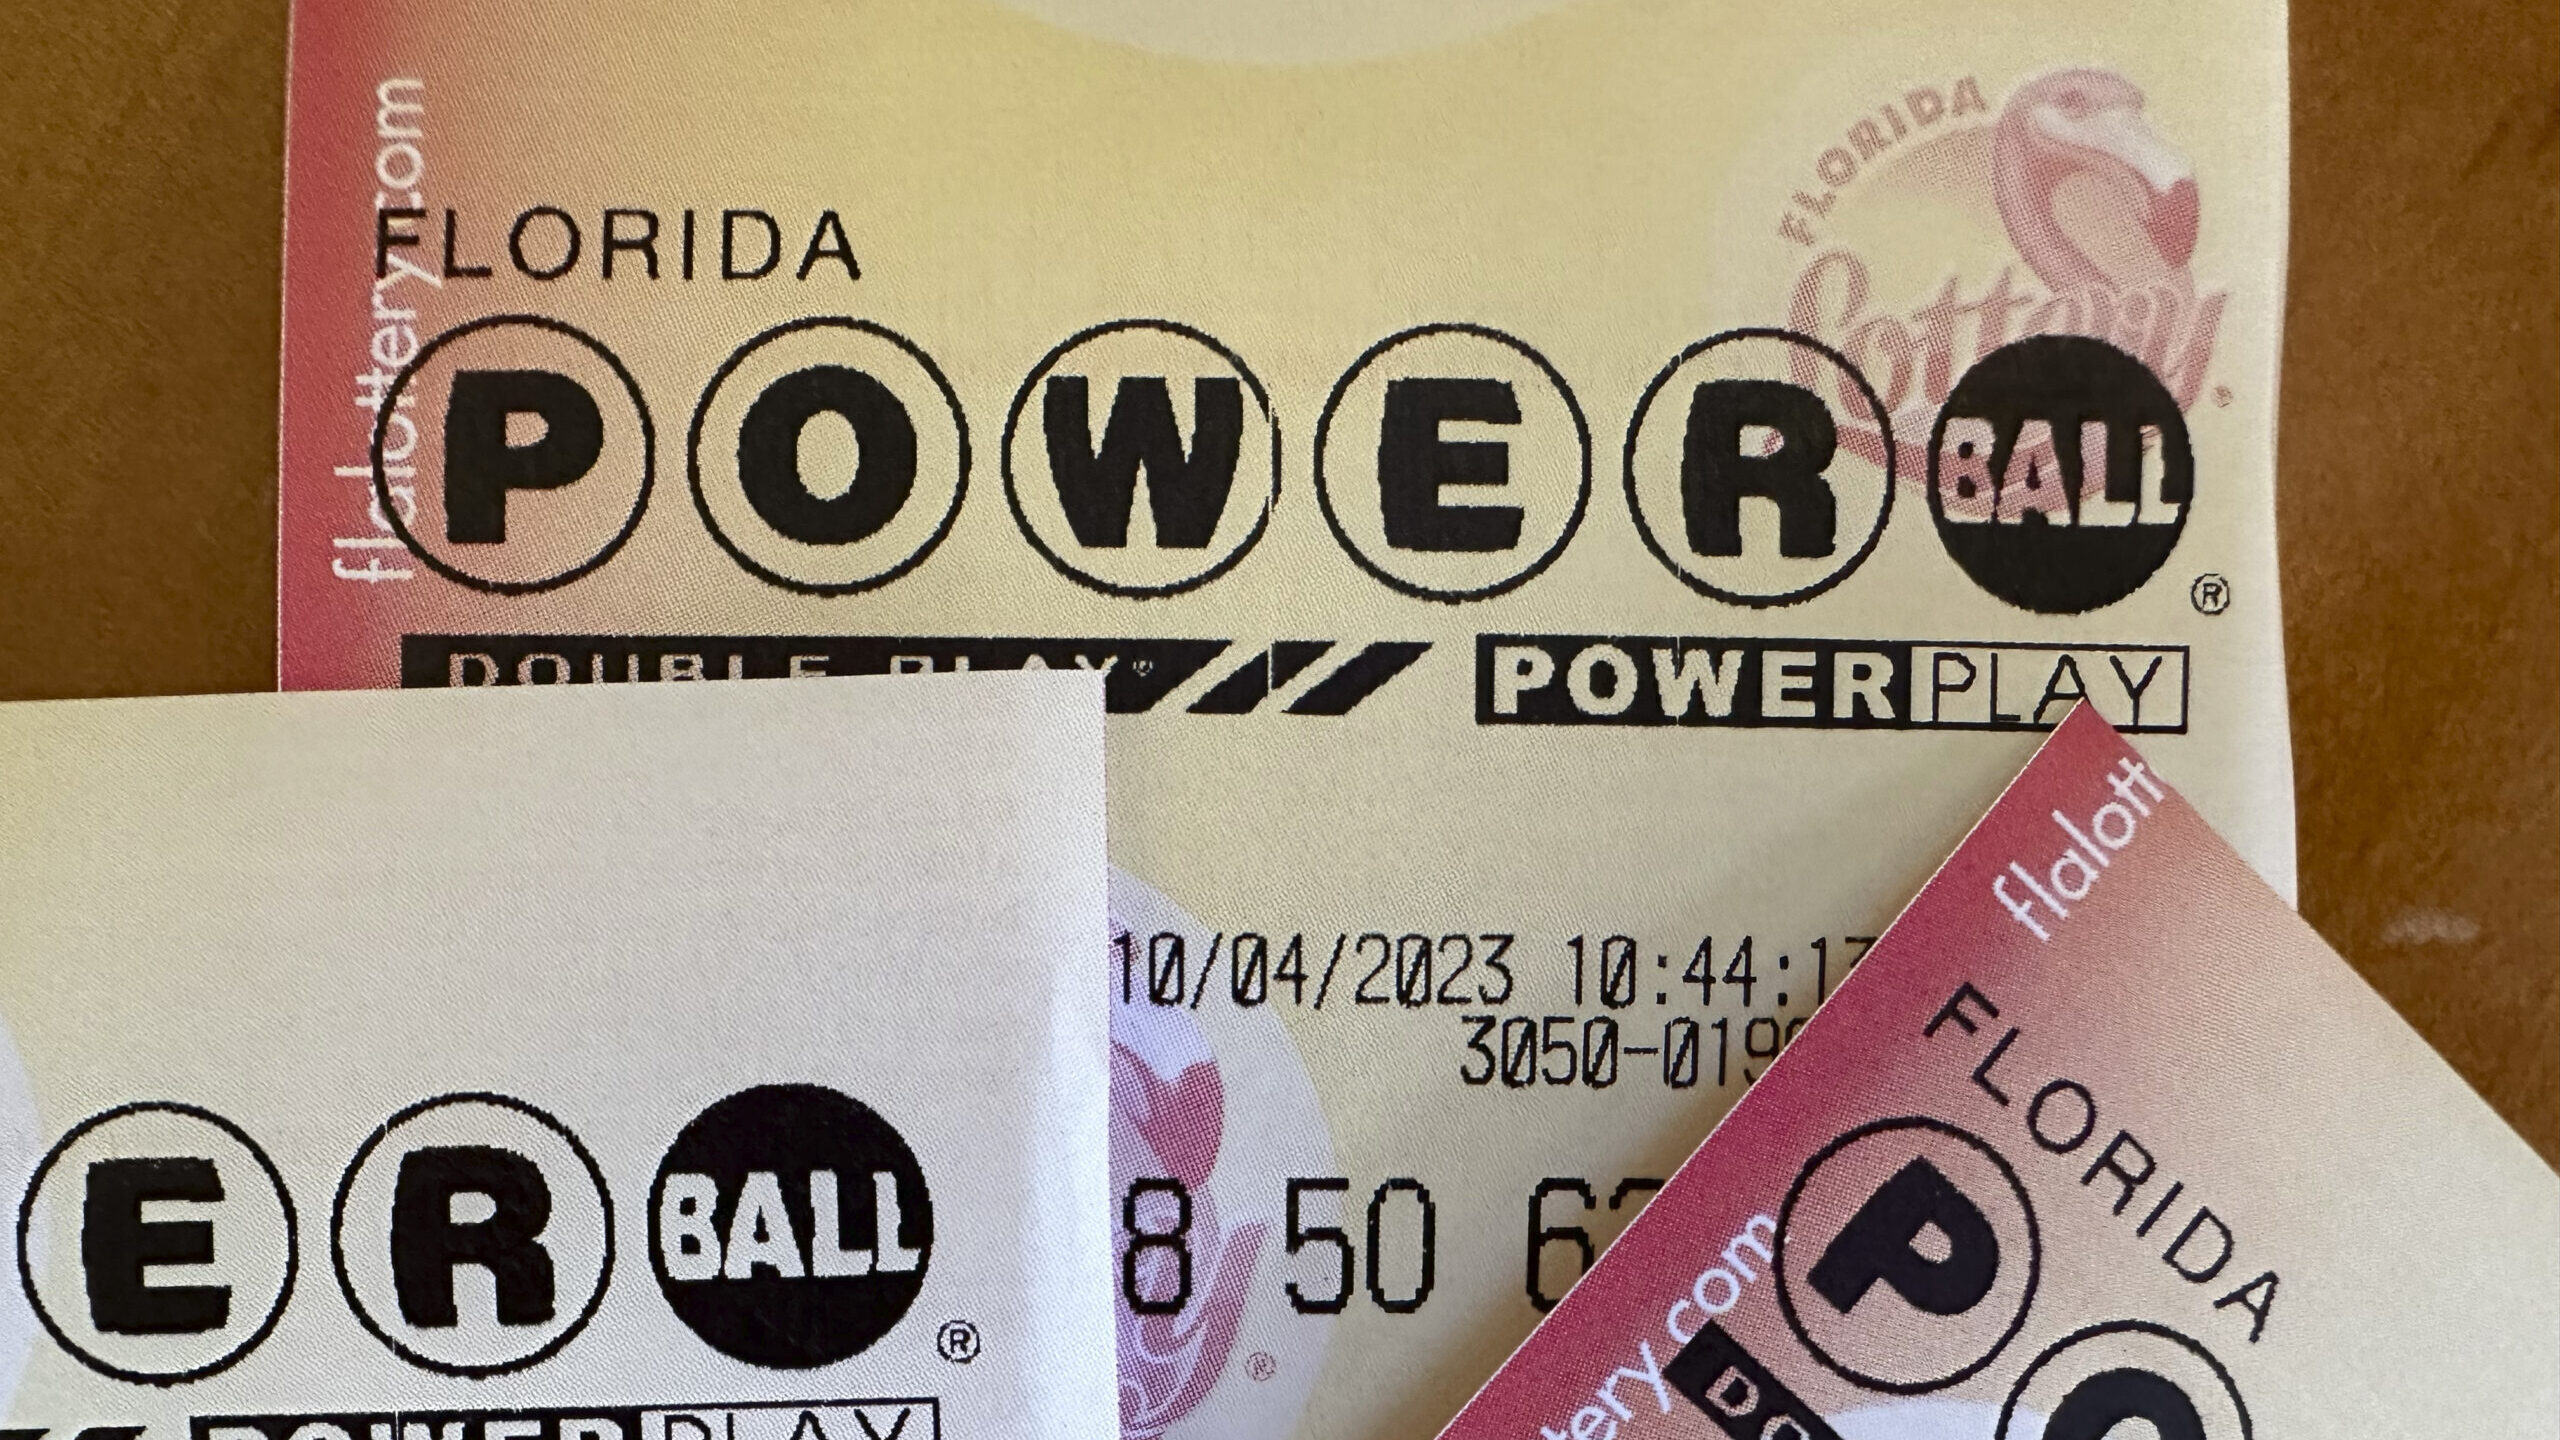 Powerball lottery tickets are displayed Oct. 4, 2023, in Surfside, Fla. An estimated $1.4 billion P...